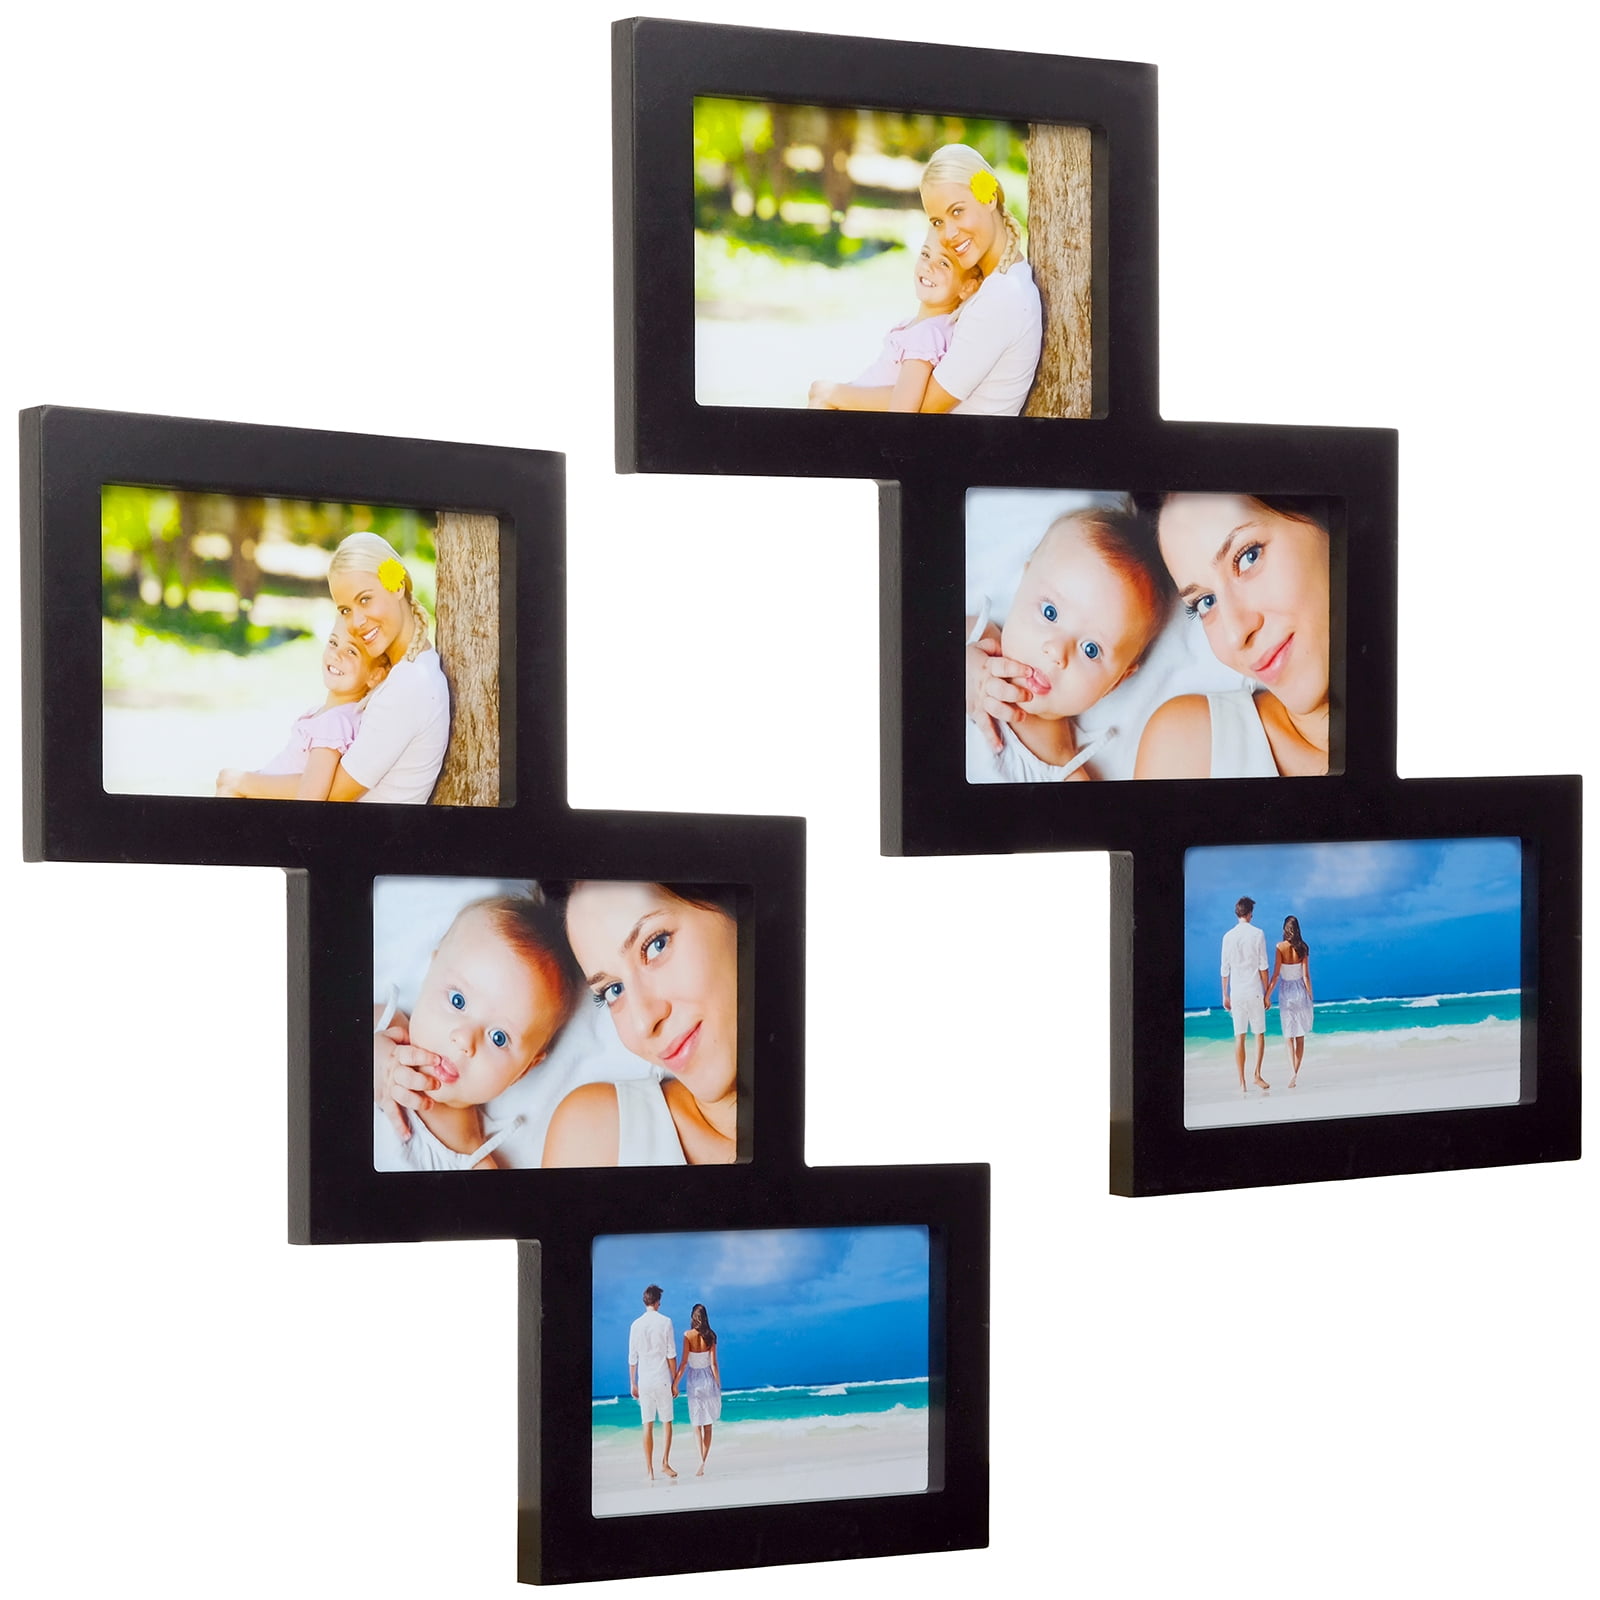 Excello Global Products Folding Wooden Collage Photo Frame, Holds 3x5 and 5x7 Photos, Desk Stand or Wall Mount, Black and White